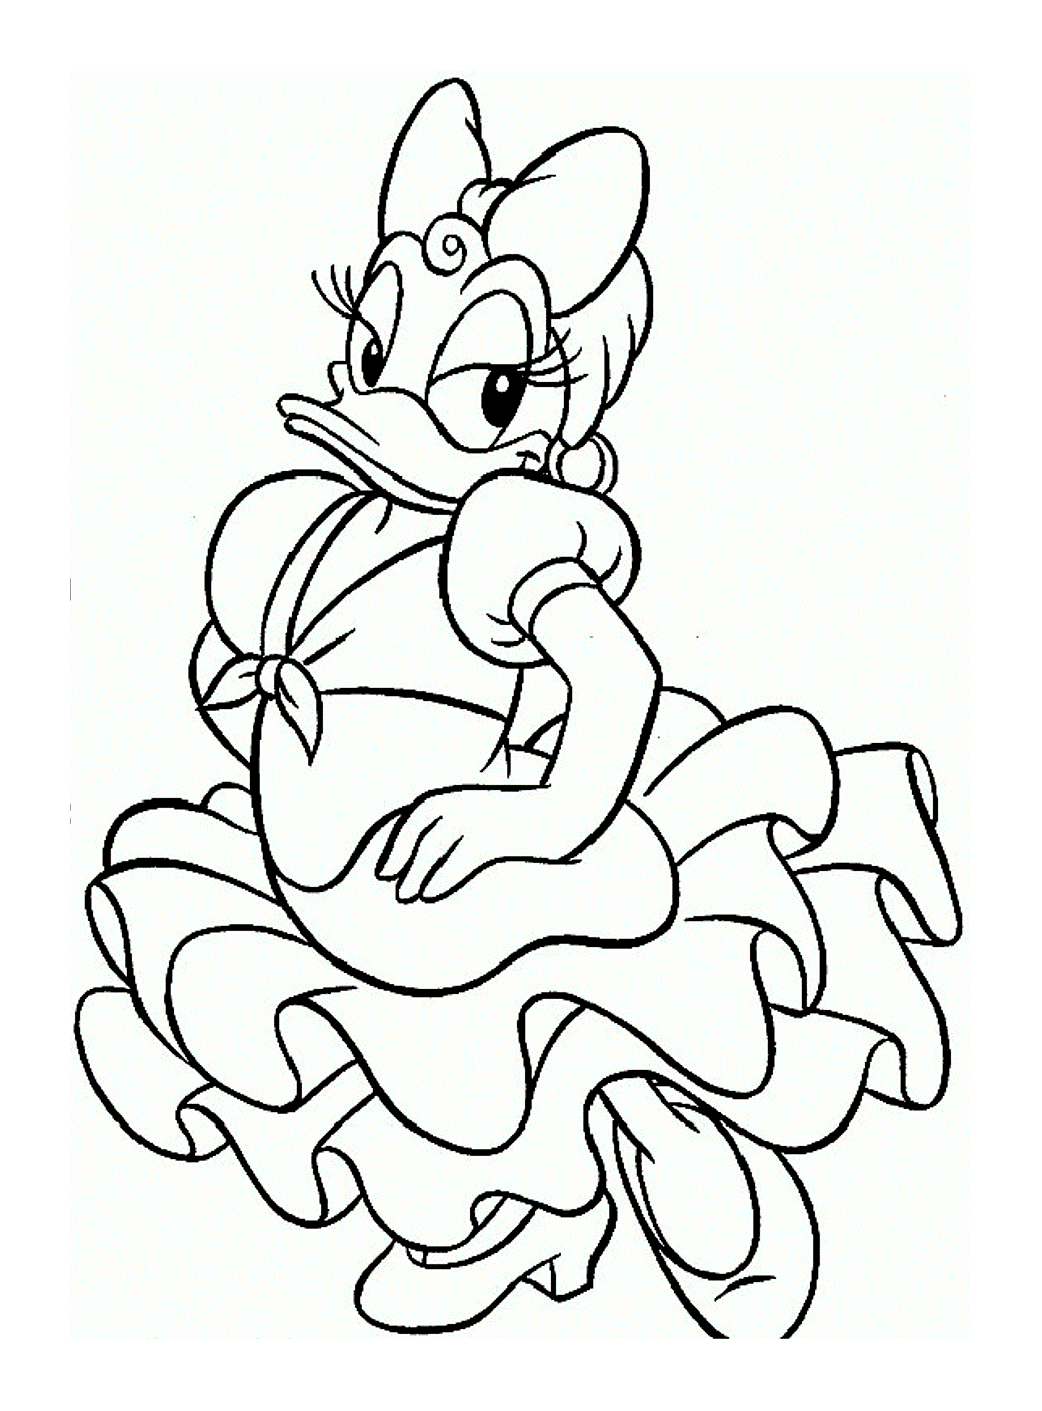 Coloring Daisy with pretty dress